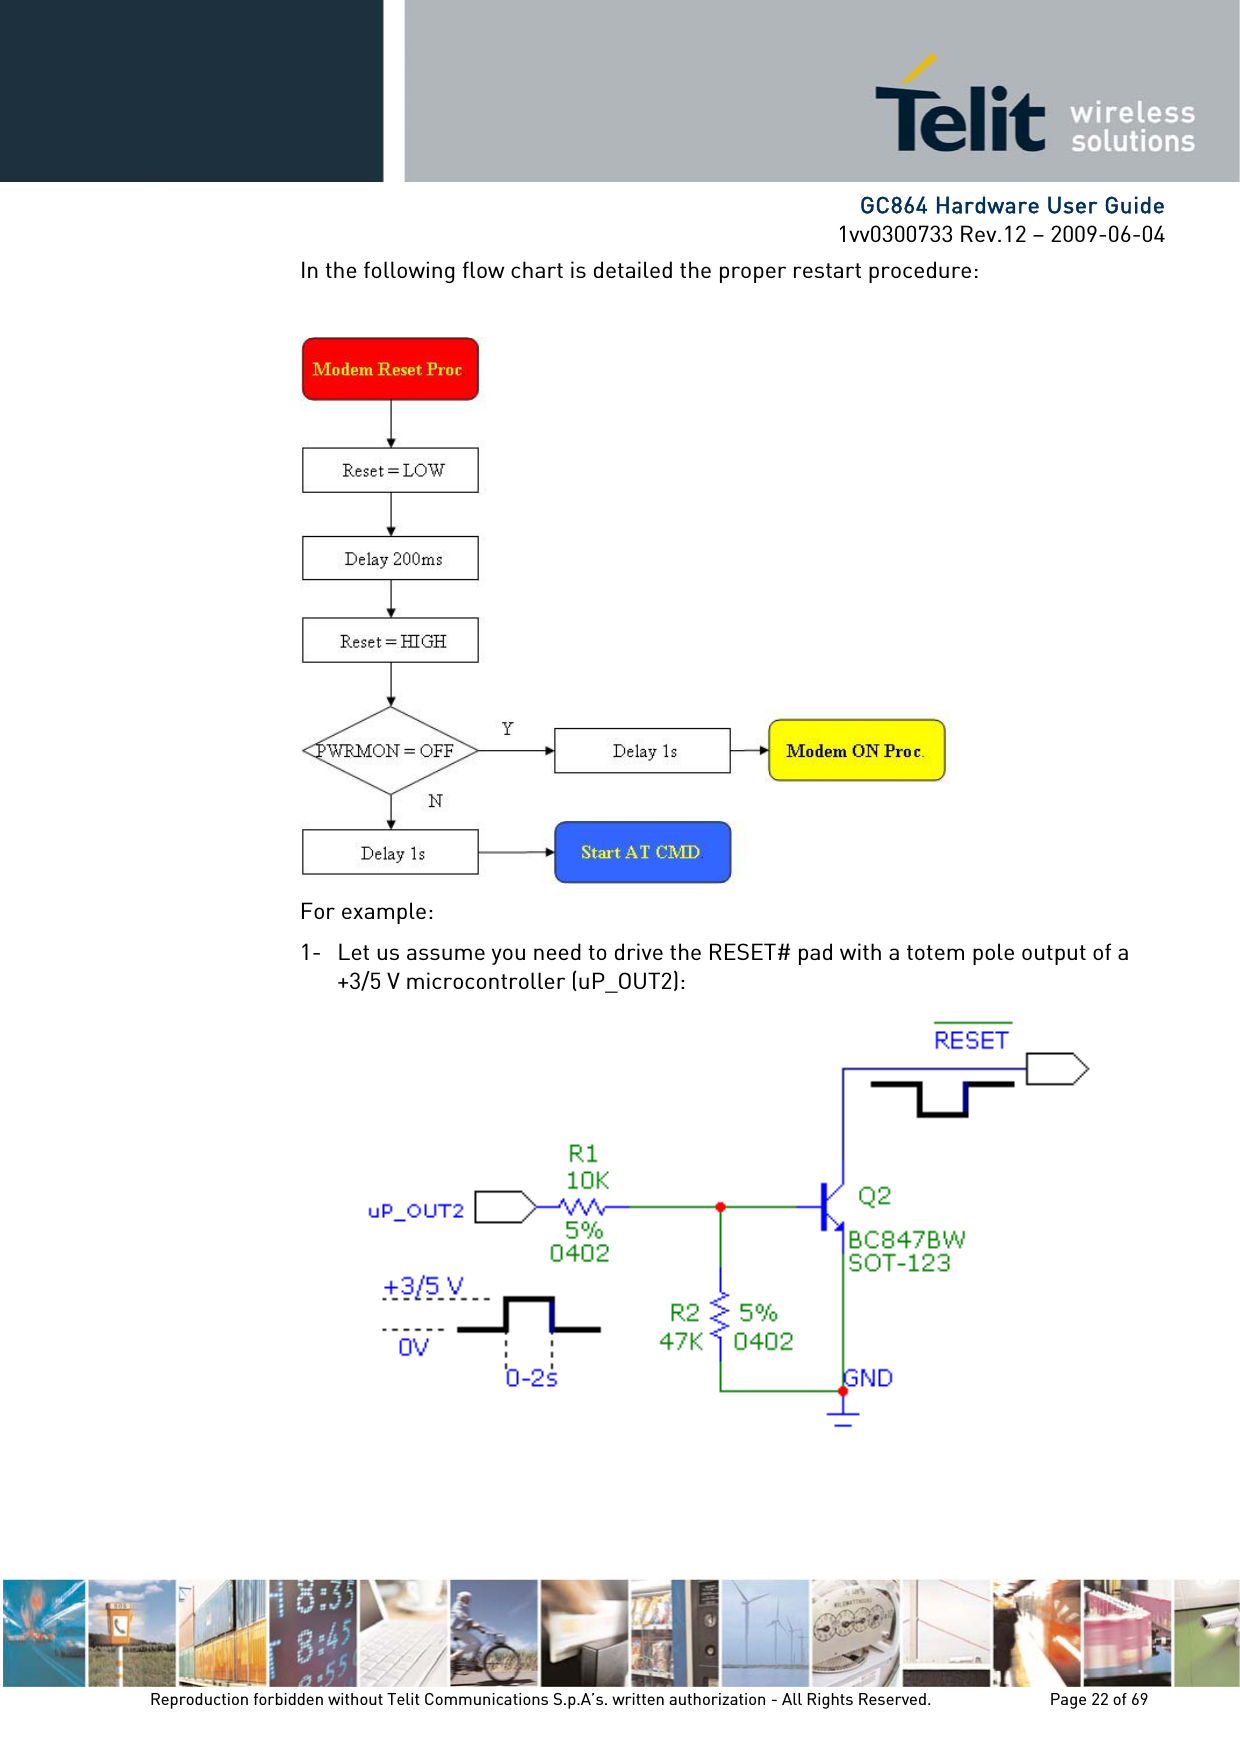      GC864 Hardware User Guide 1vv0300733 Rev.12 – 2009-06-04 In the following flow chart is detailed the proper restart procedure:   For example: 1- Let us assume you need to drive the RESET# pad with a totem pole output of a +3/5 V microcontroller (uP_OUT2):    Reproduction forbidden without Telit Communications S.p.A’s. written authorization - All Rights Reserved.    Page 22 of 69  